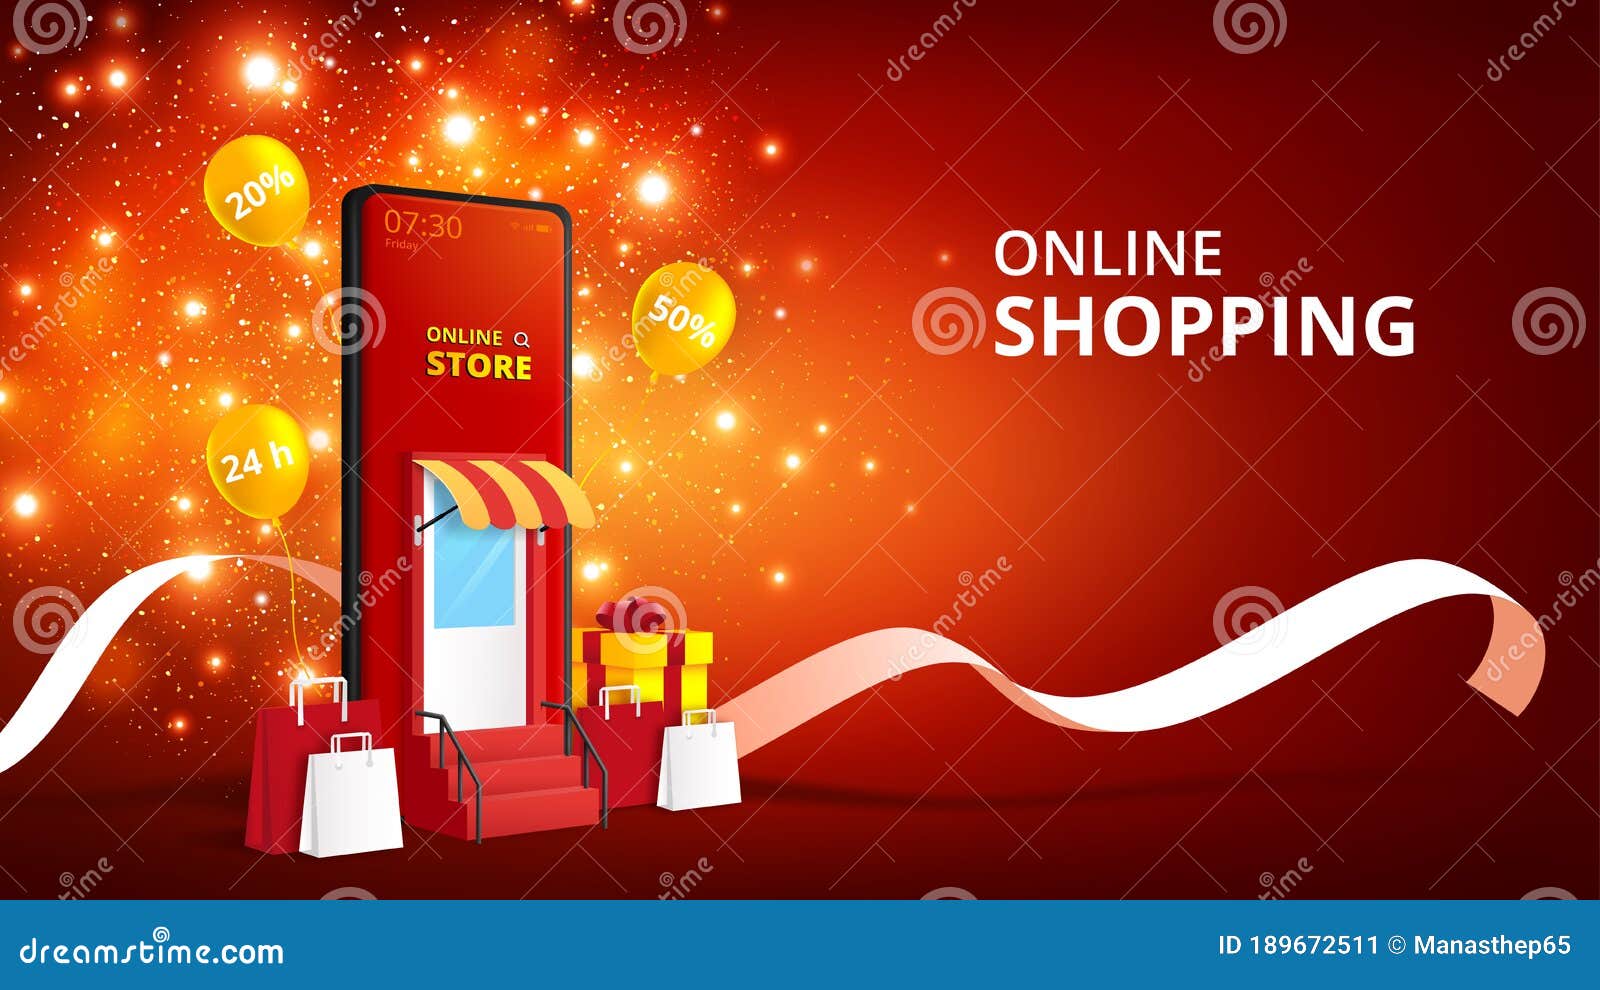 Online Shopping Store with Mobile  Marketing and Sale Banner  Background Stock Vector - Illustration of poster, digital: 189672511